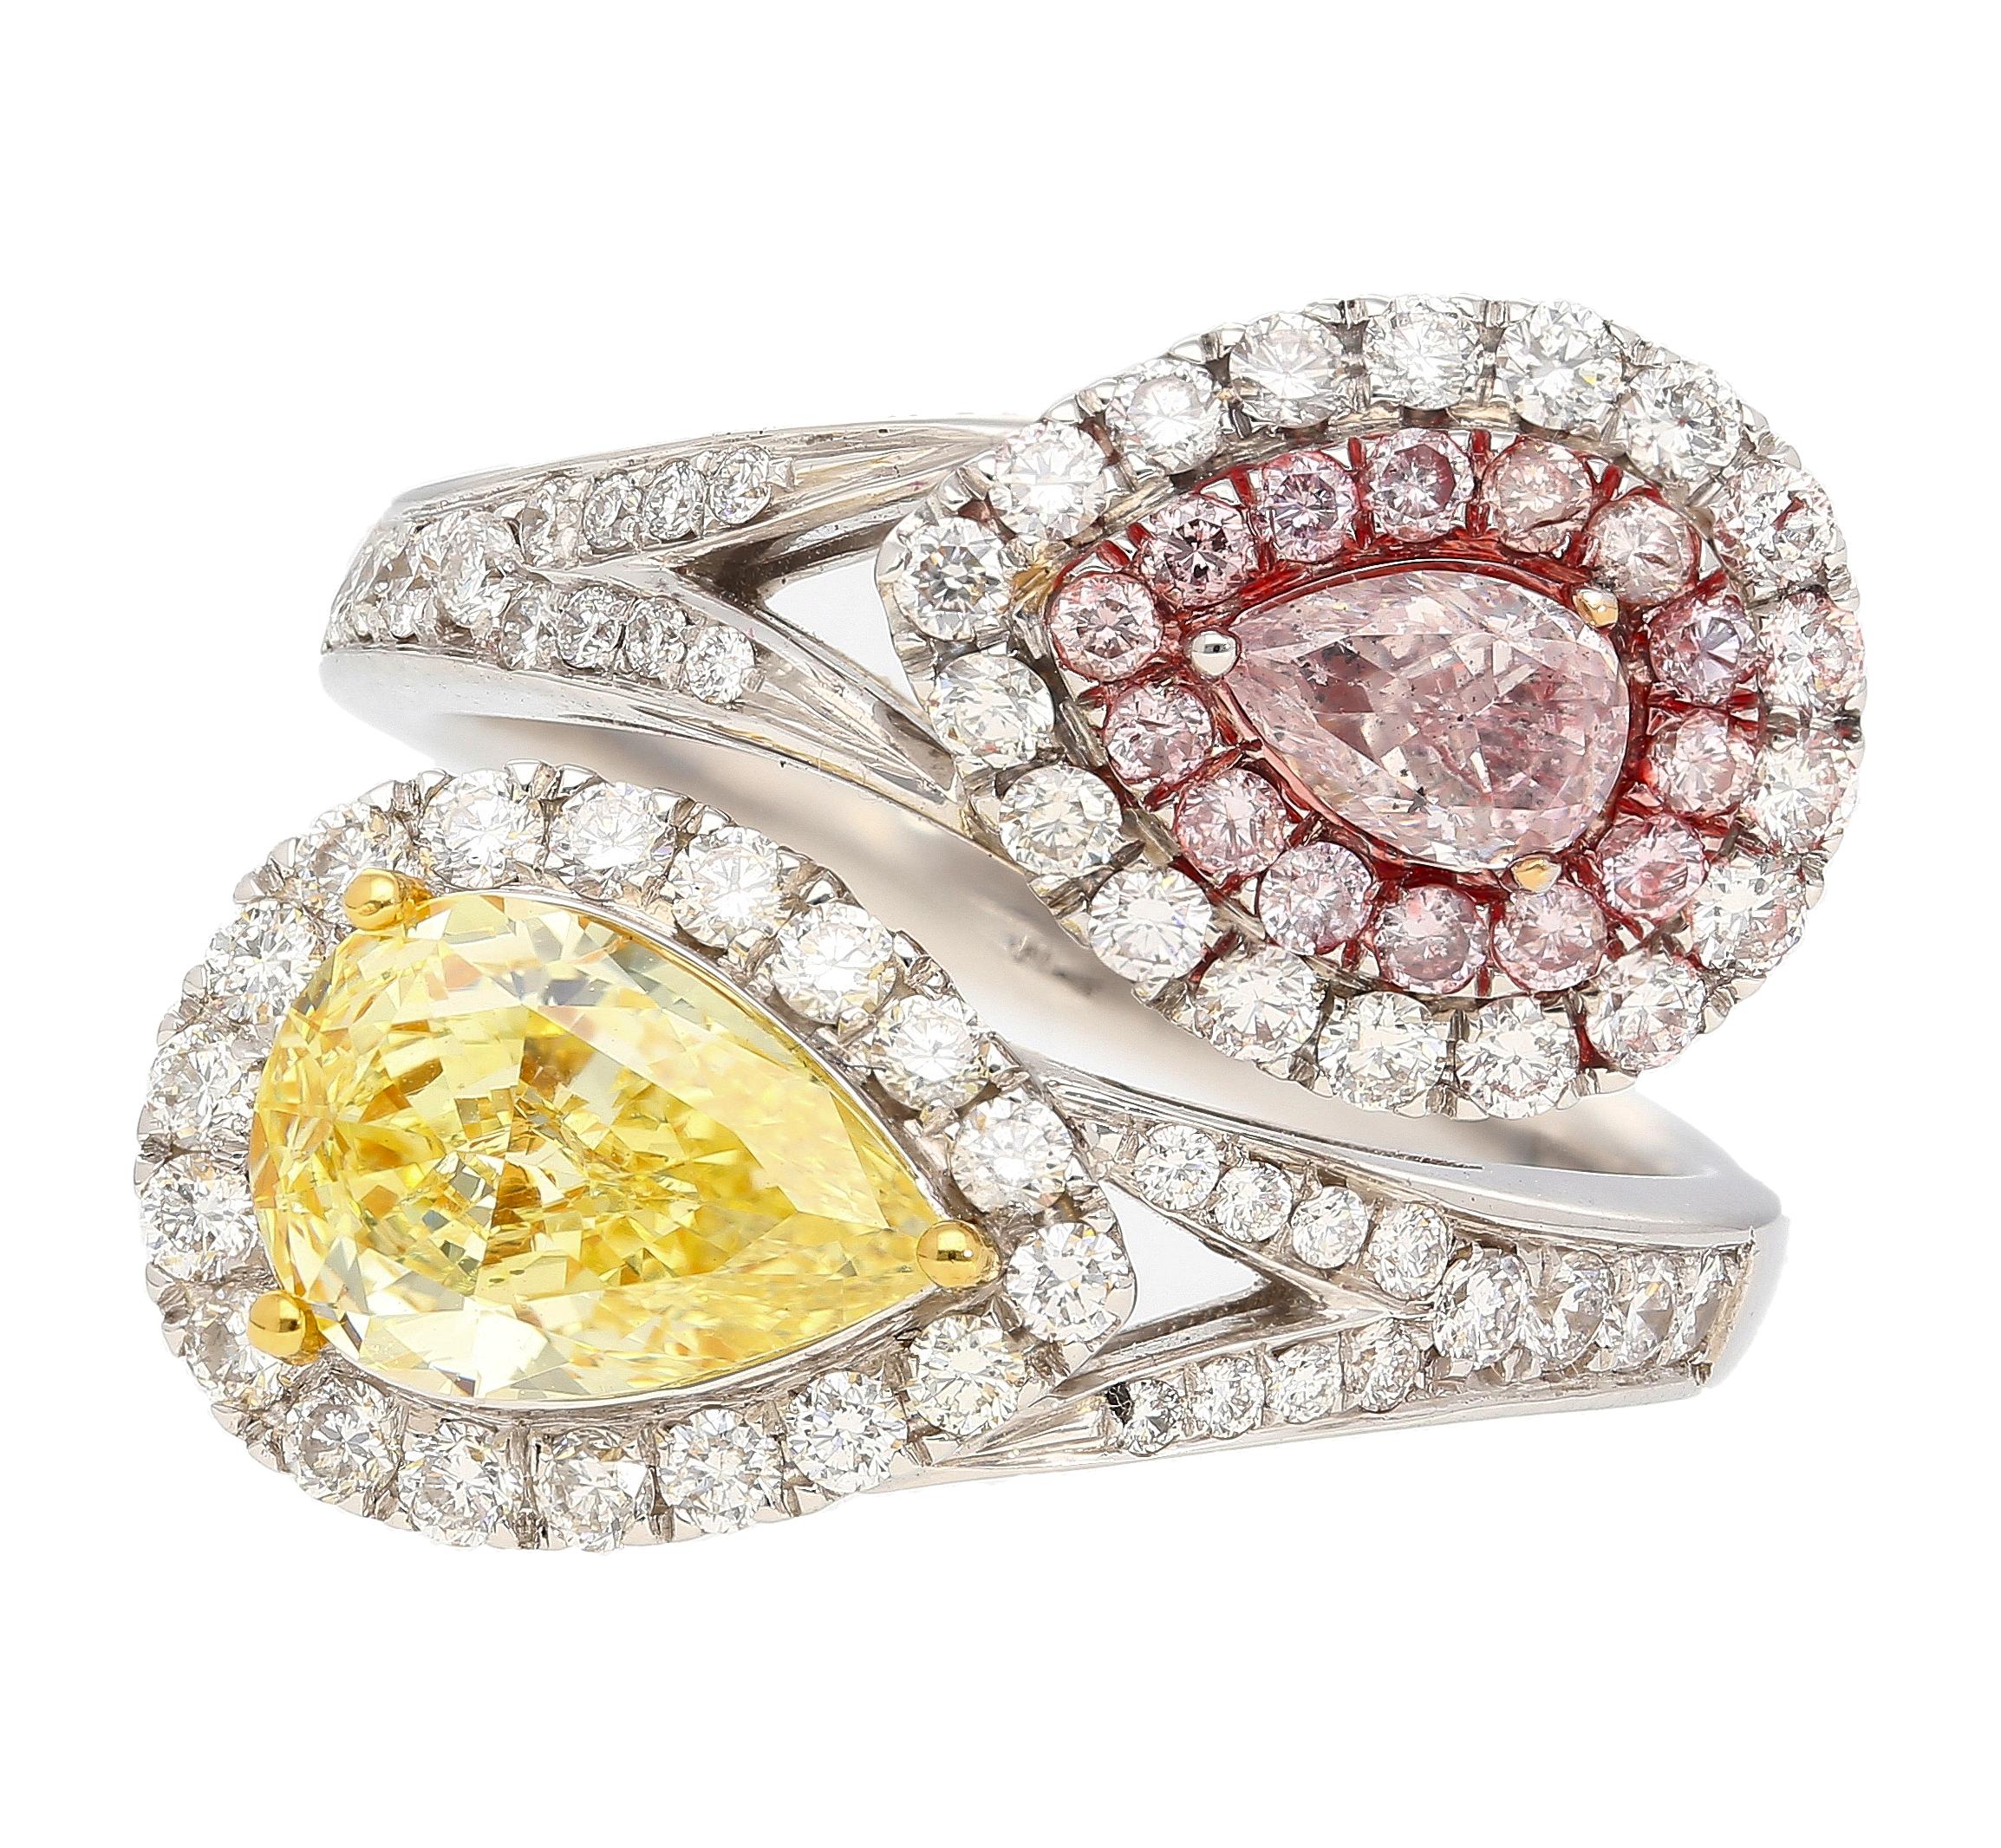 GIA Certified Fancy Intense Yellow and Fancy Light Pink Natural Diamond Toi Et Moi Ring in 18K White Gold. Complete with two GIA certificates.

The sought after Toi Et Moi ring, famous for its symbolism of two halves meeting as one. Done justice